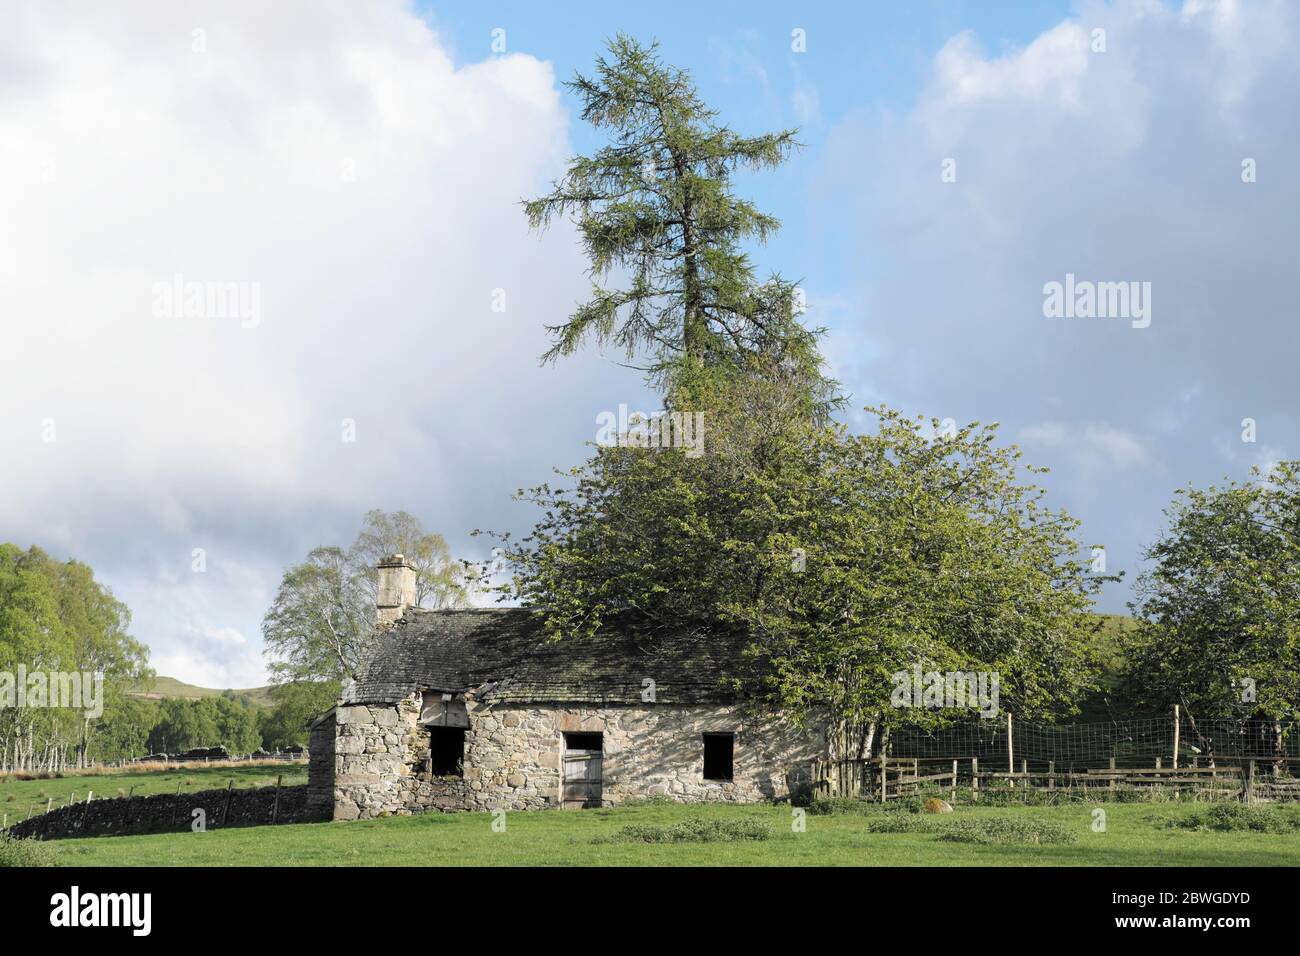 The 'Old House' used by generations of stockmen and farm labourers who worked on Invervack farm. Now derelict . Blair Atholl, Perthshire,Scotland UK Stock Photo